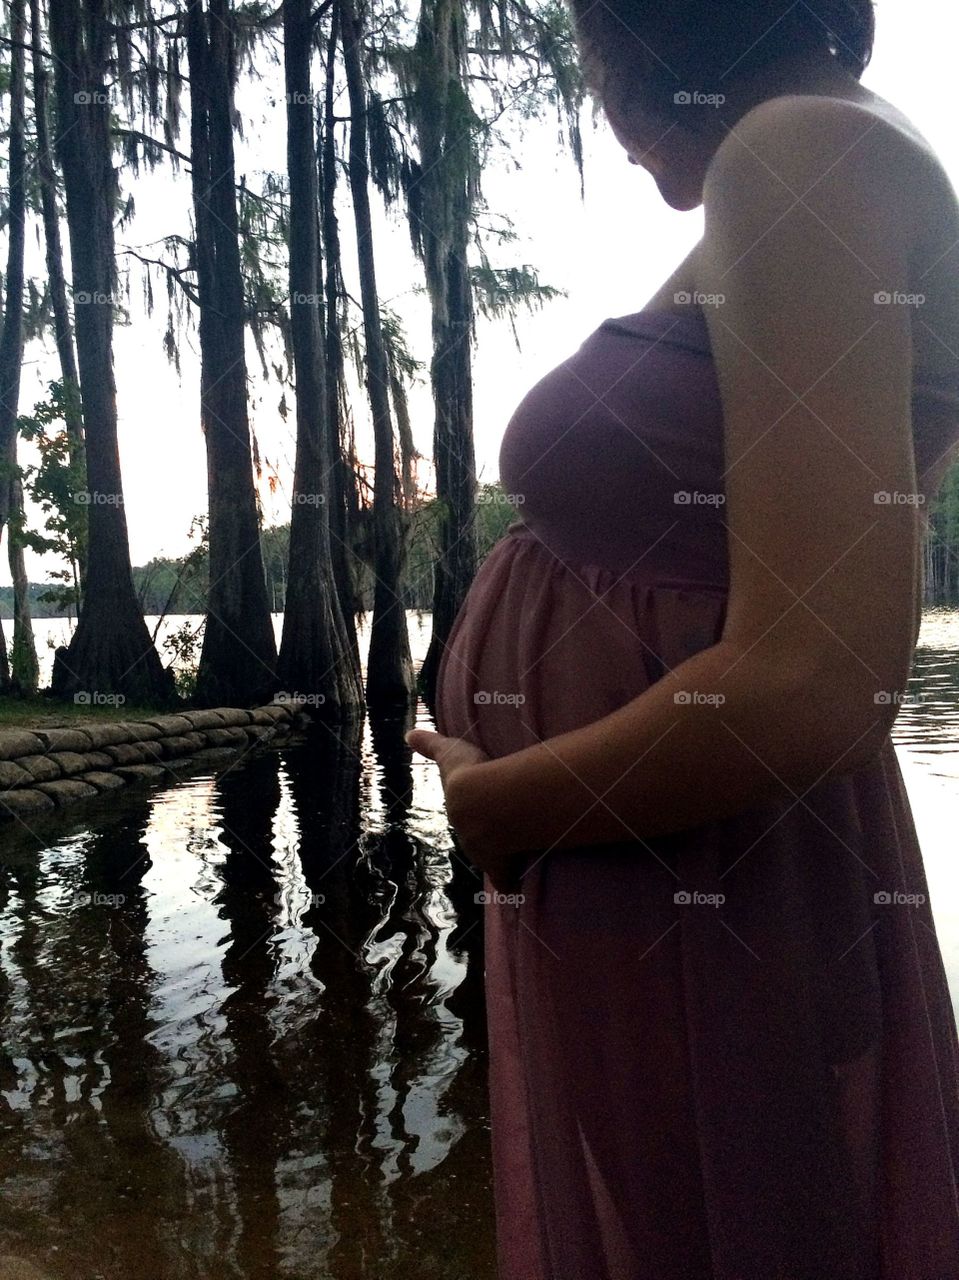 Taking in the beauty around me. Calm pregnancy 